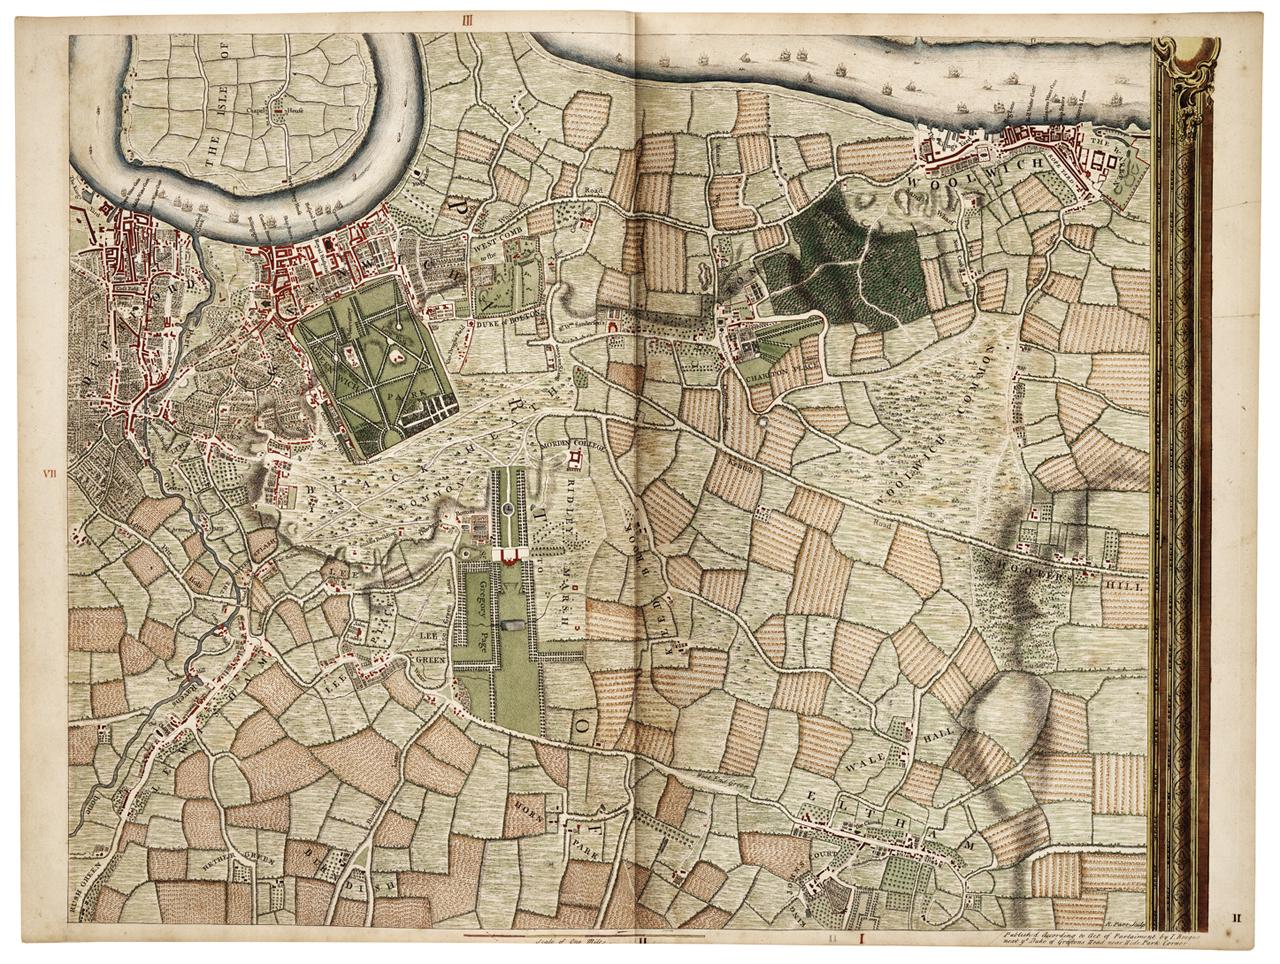 A historical map of Blackheath and Greenwich by John Rocque